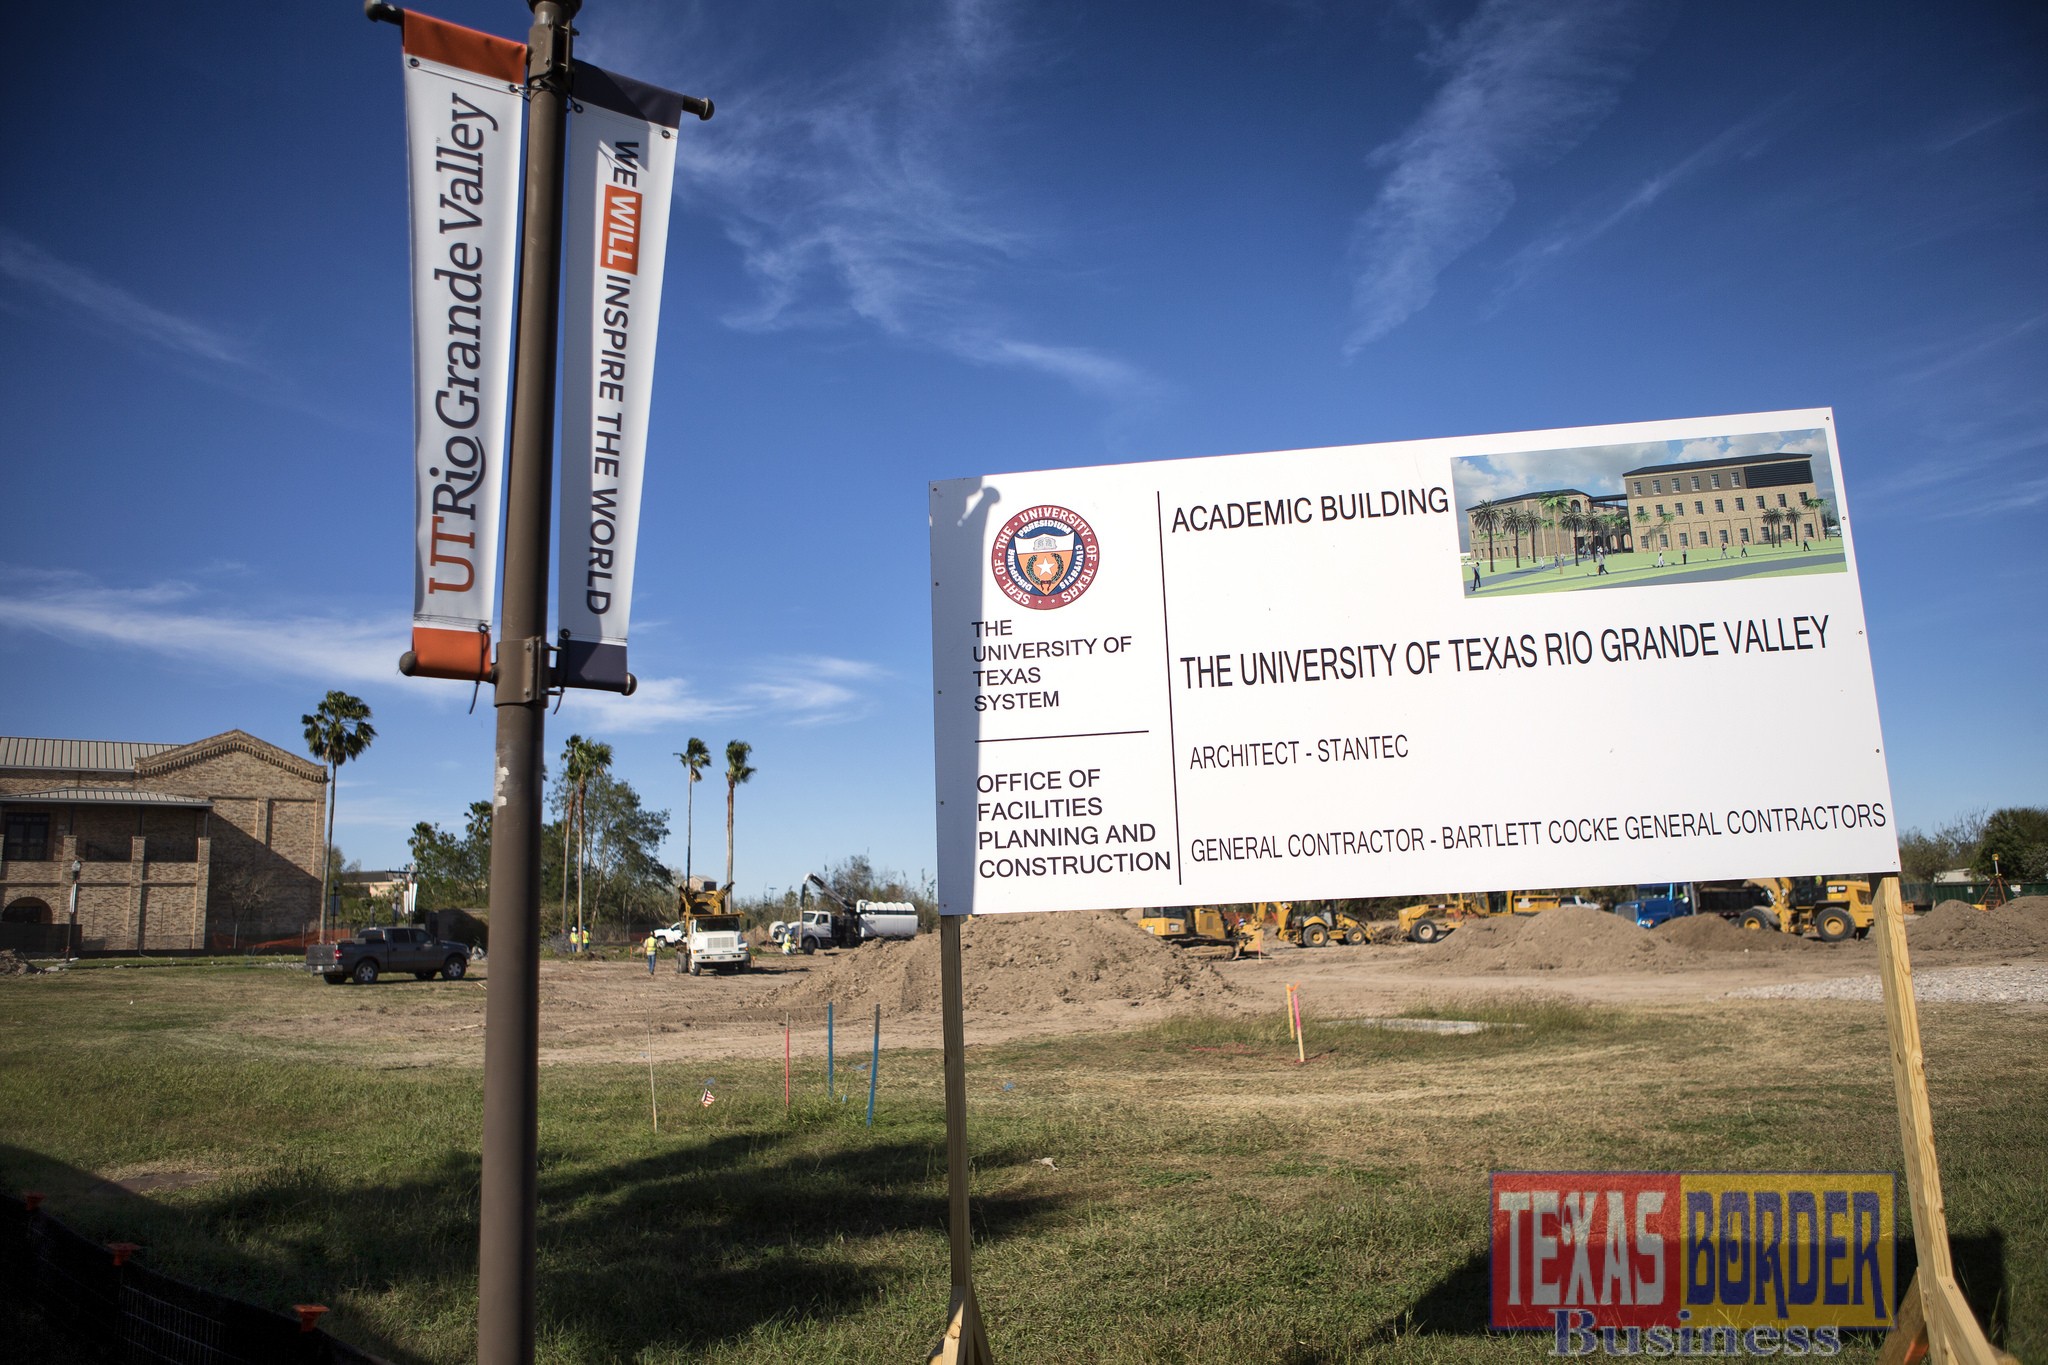 Can You Dig It Celebrates Construction Of New Utrgv Academic Building Texas Border Business